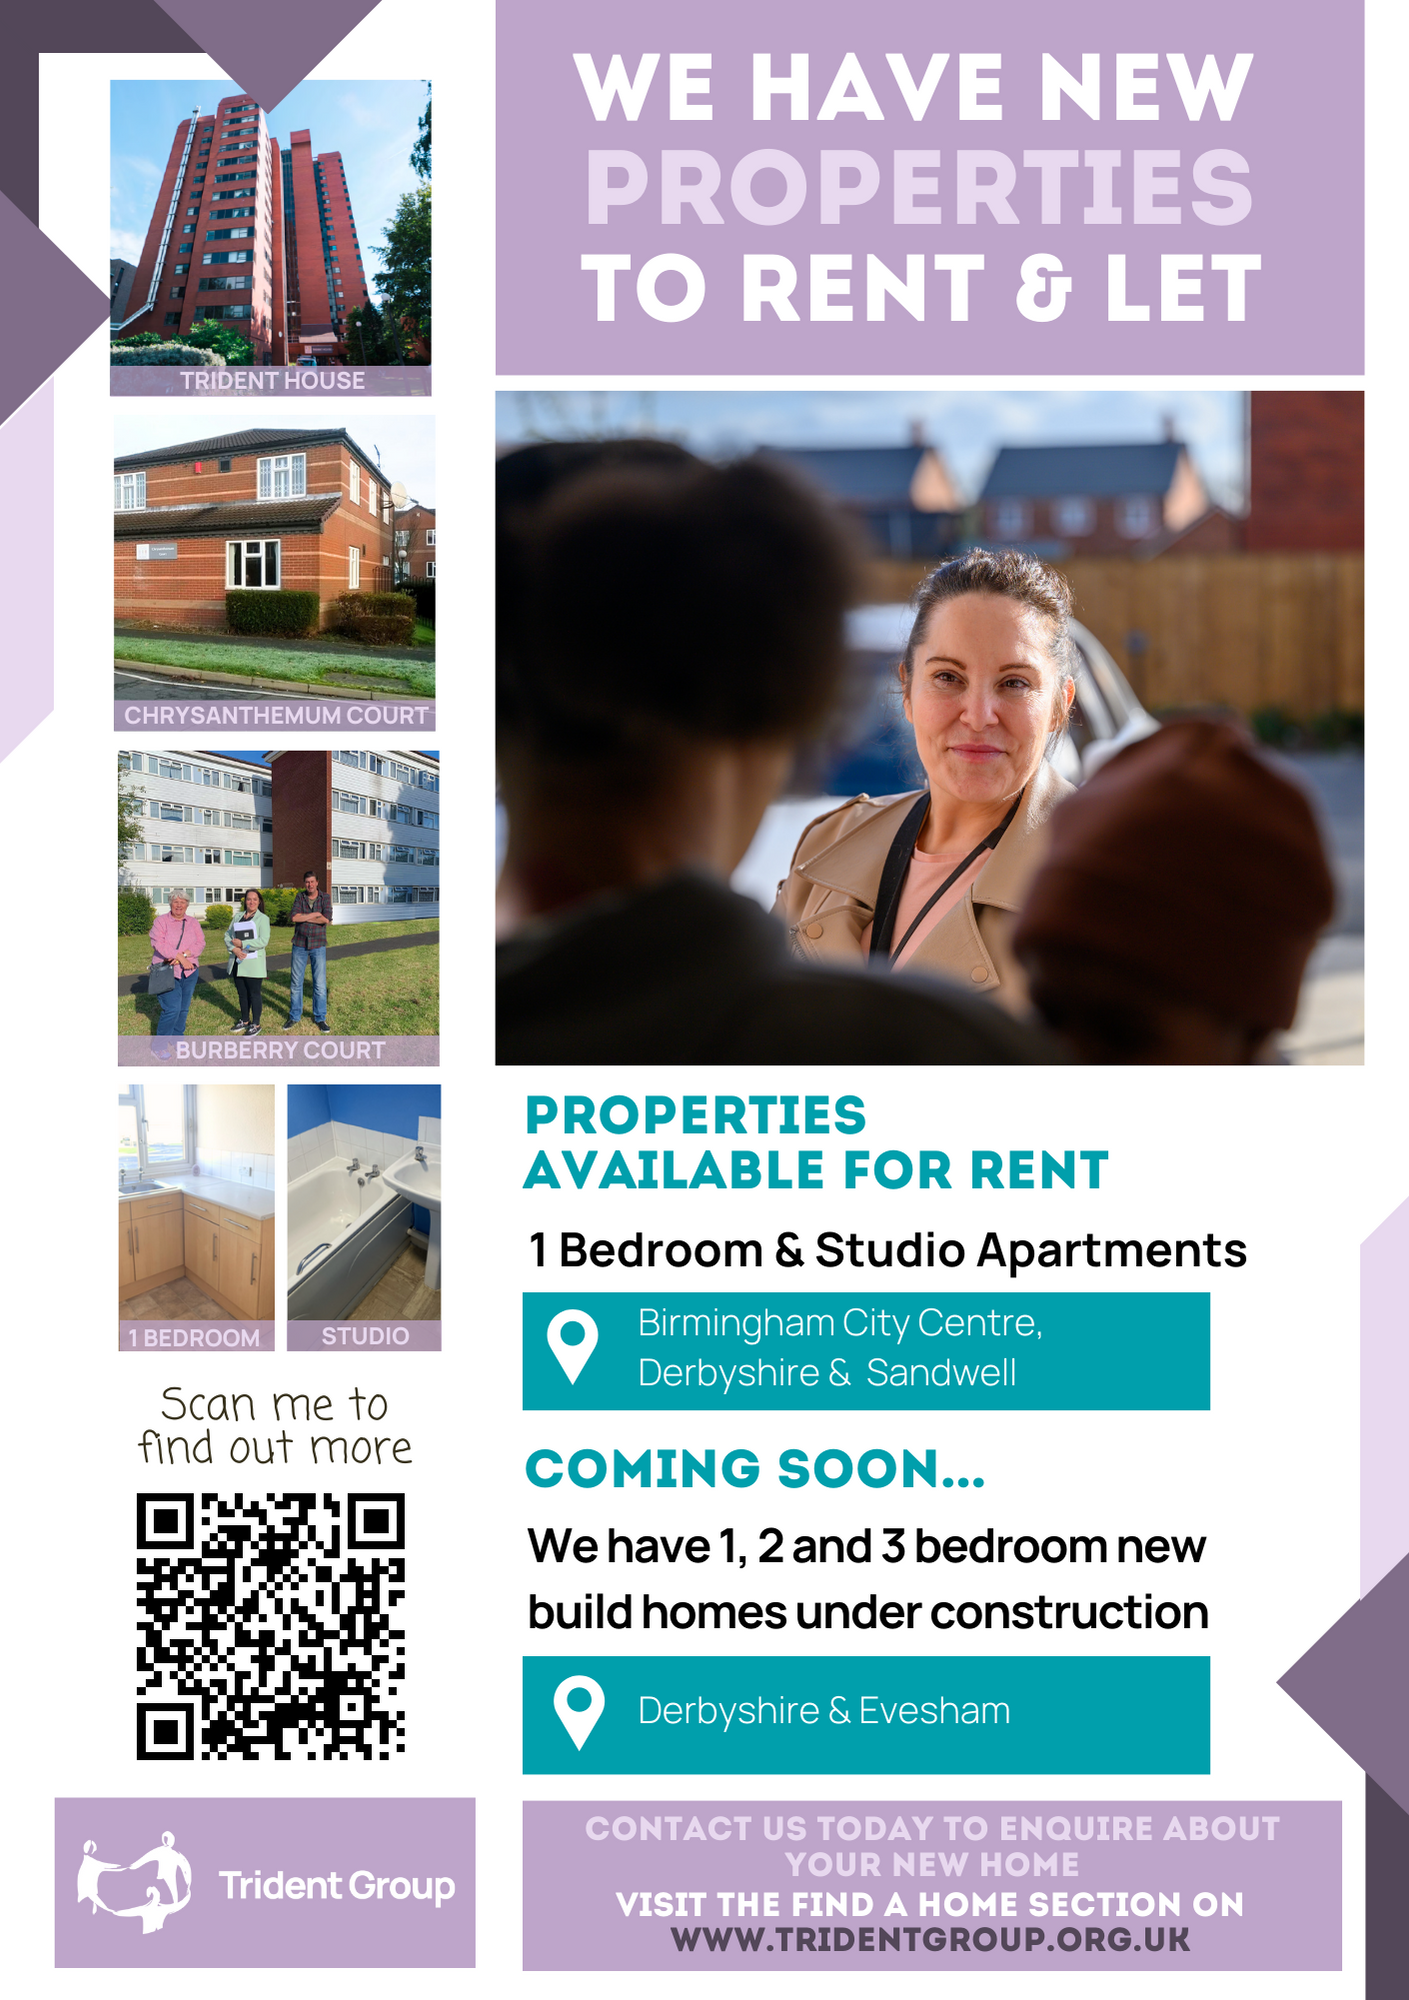 Flyer showing images of Trident House, Burberry Court and Chrysanthemum informing people they have properties to let.